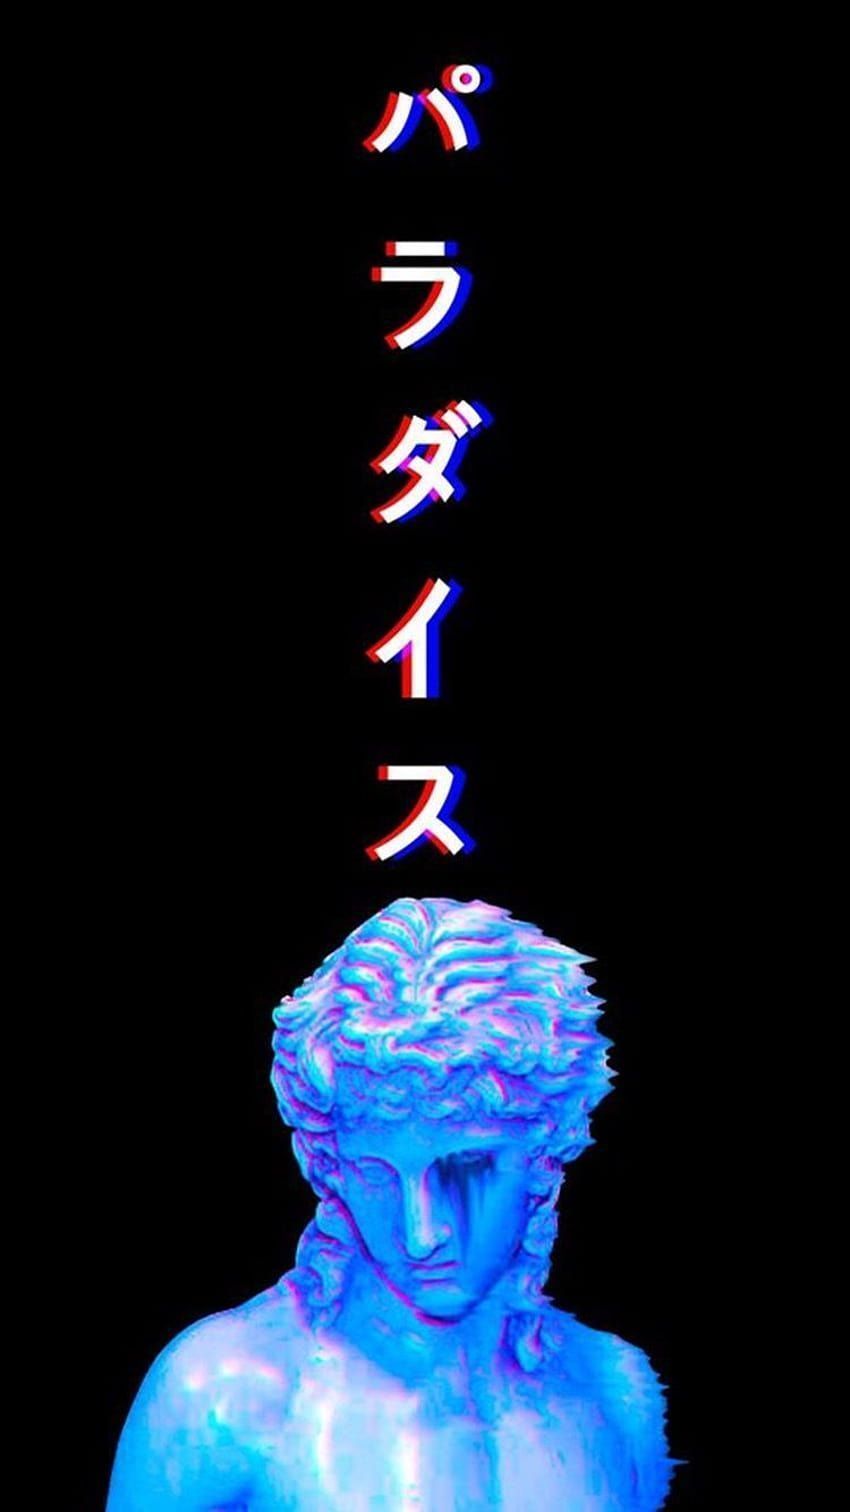 Aesthetic wallpaper with a blue statue - Dark vaporwave